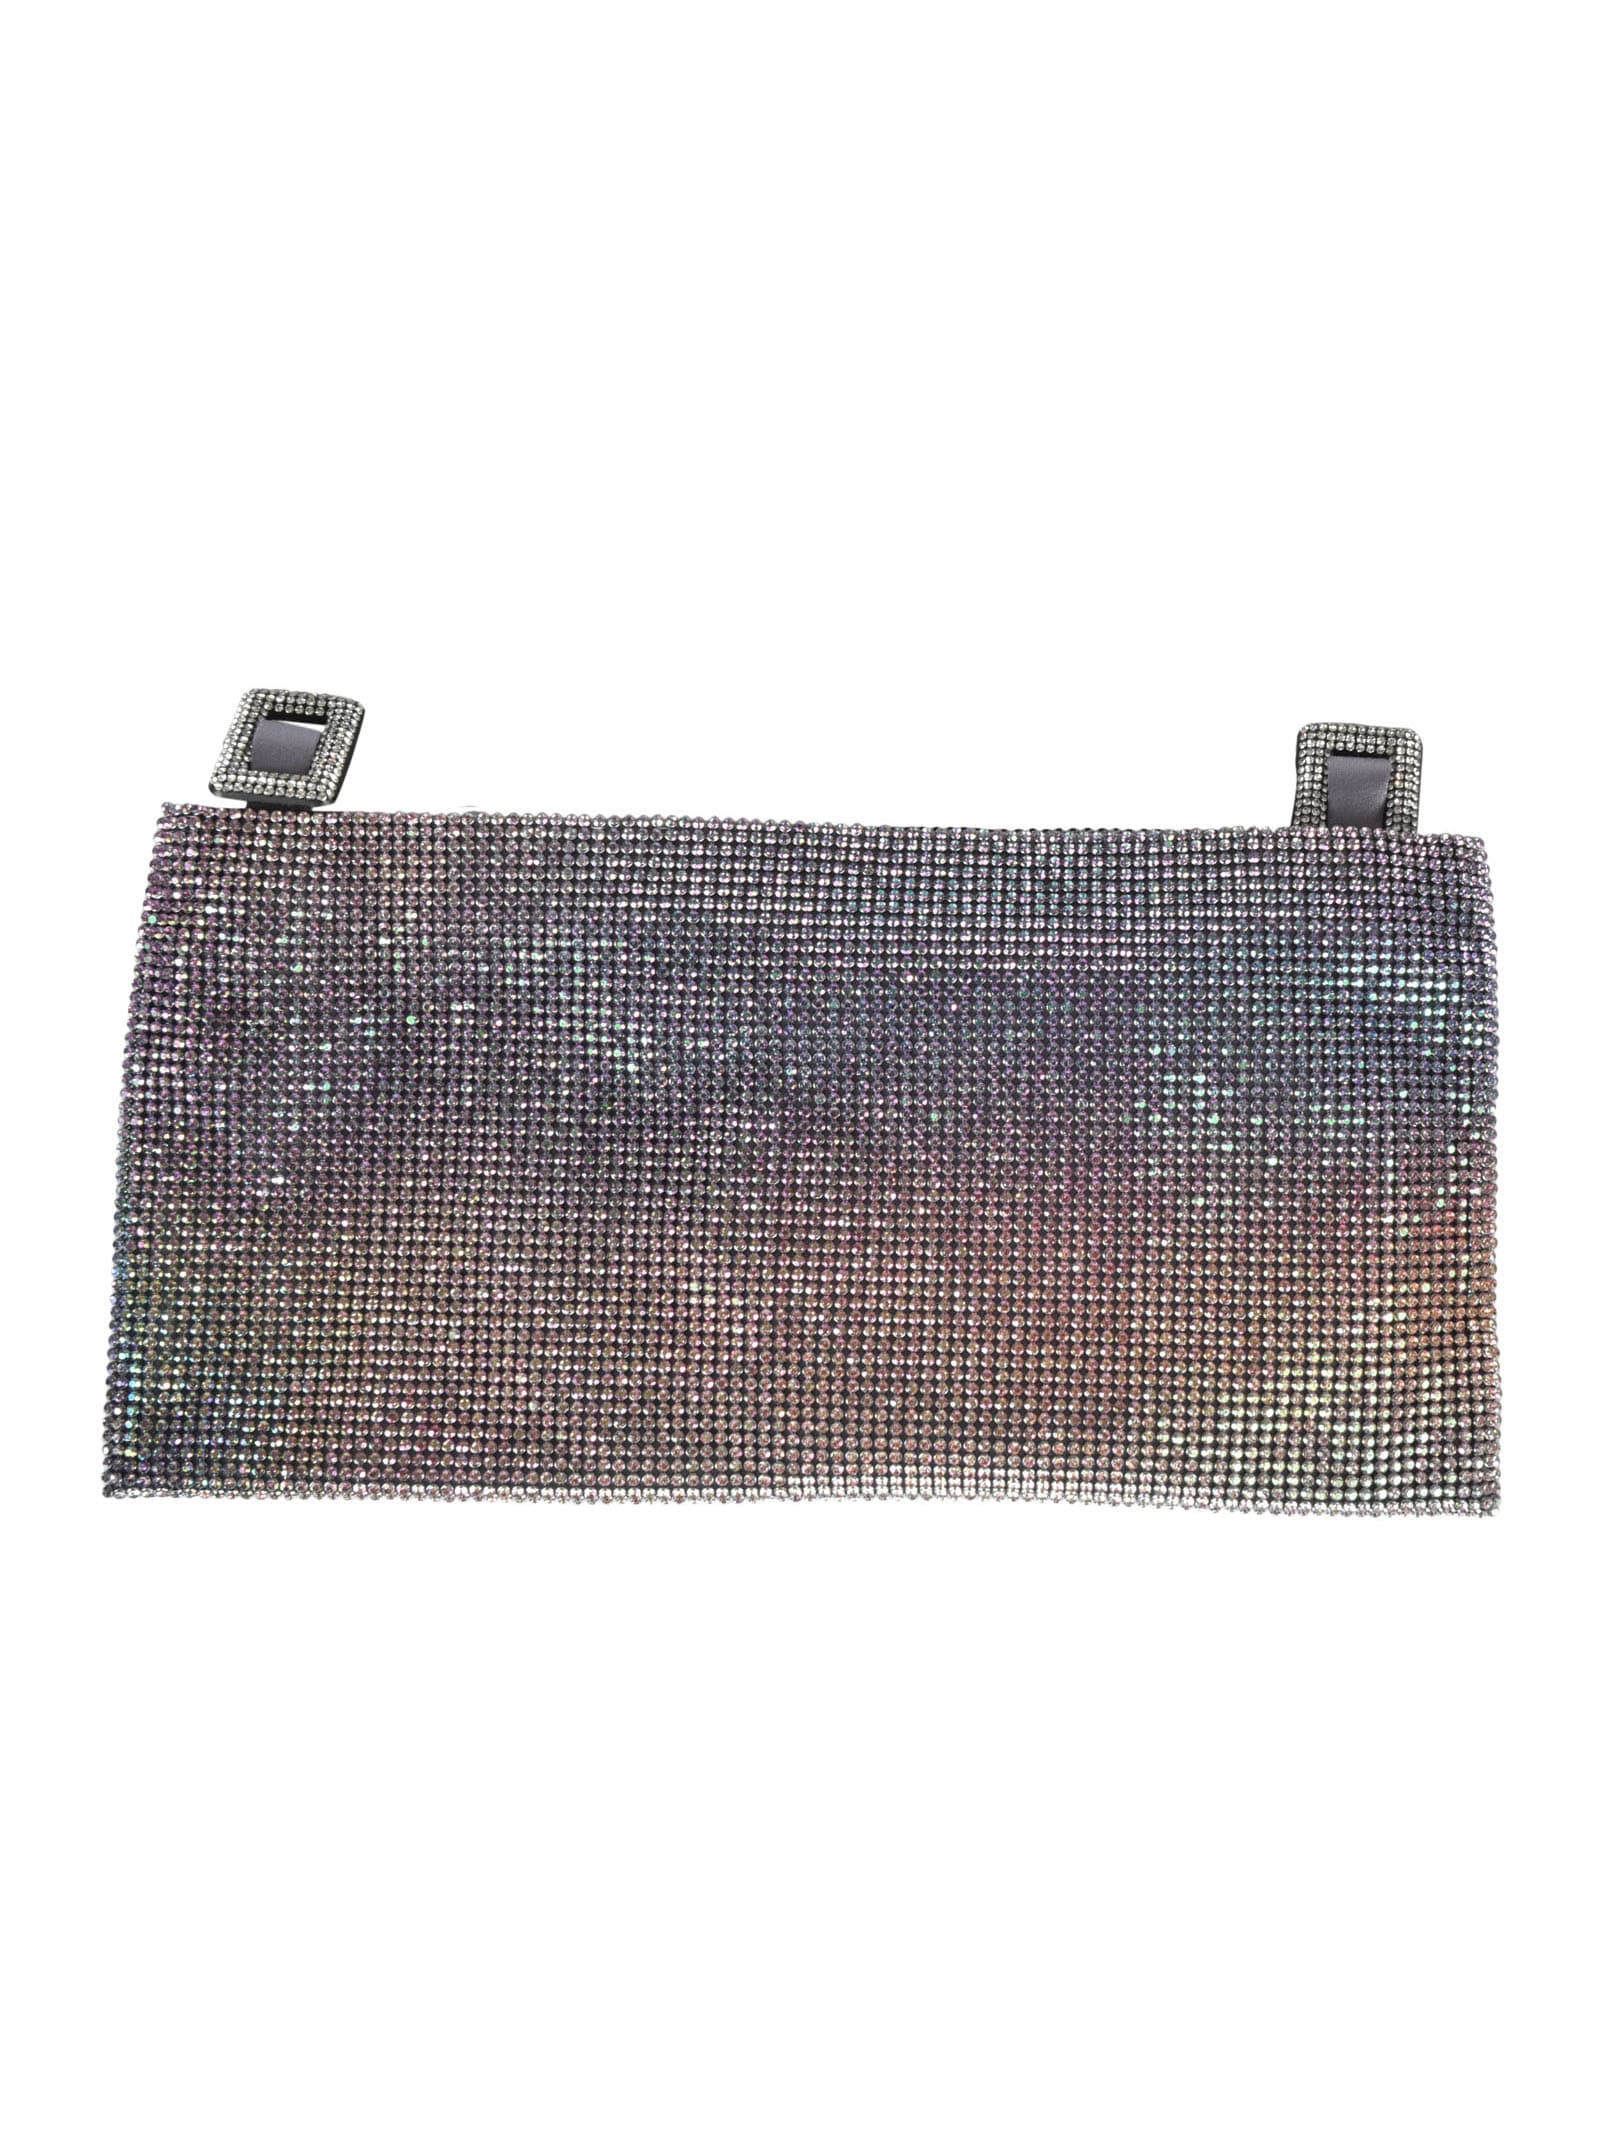 Benedetta Bruzziches Crystal Embellished Pouch